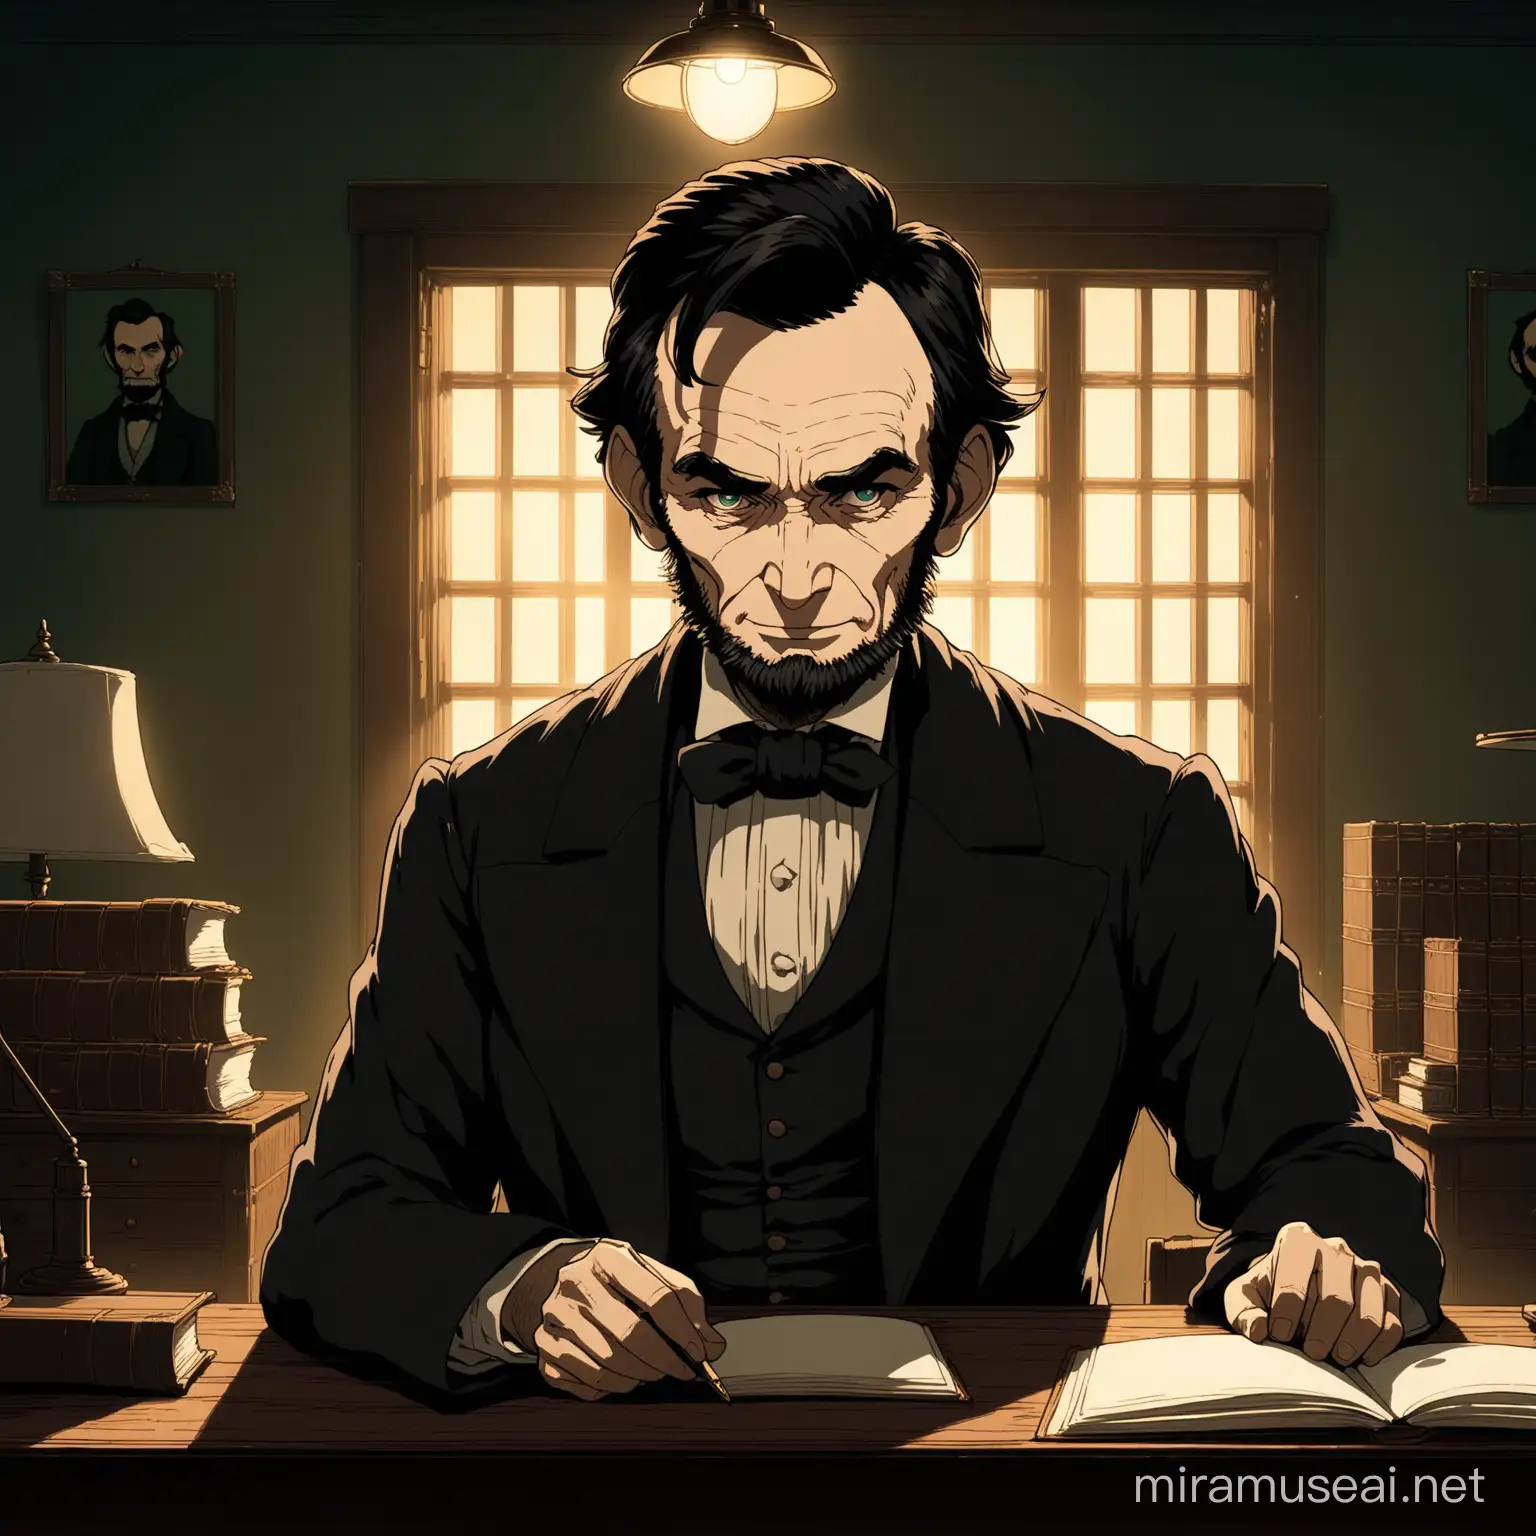 Historical Figure Abraham Lincoln in Ghibli Art Style with Intense Expression